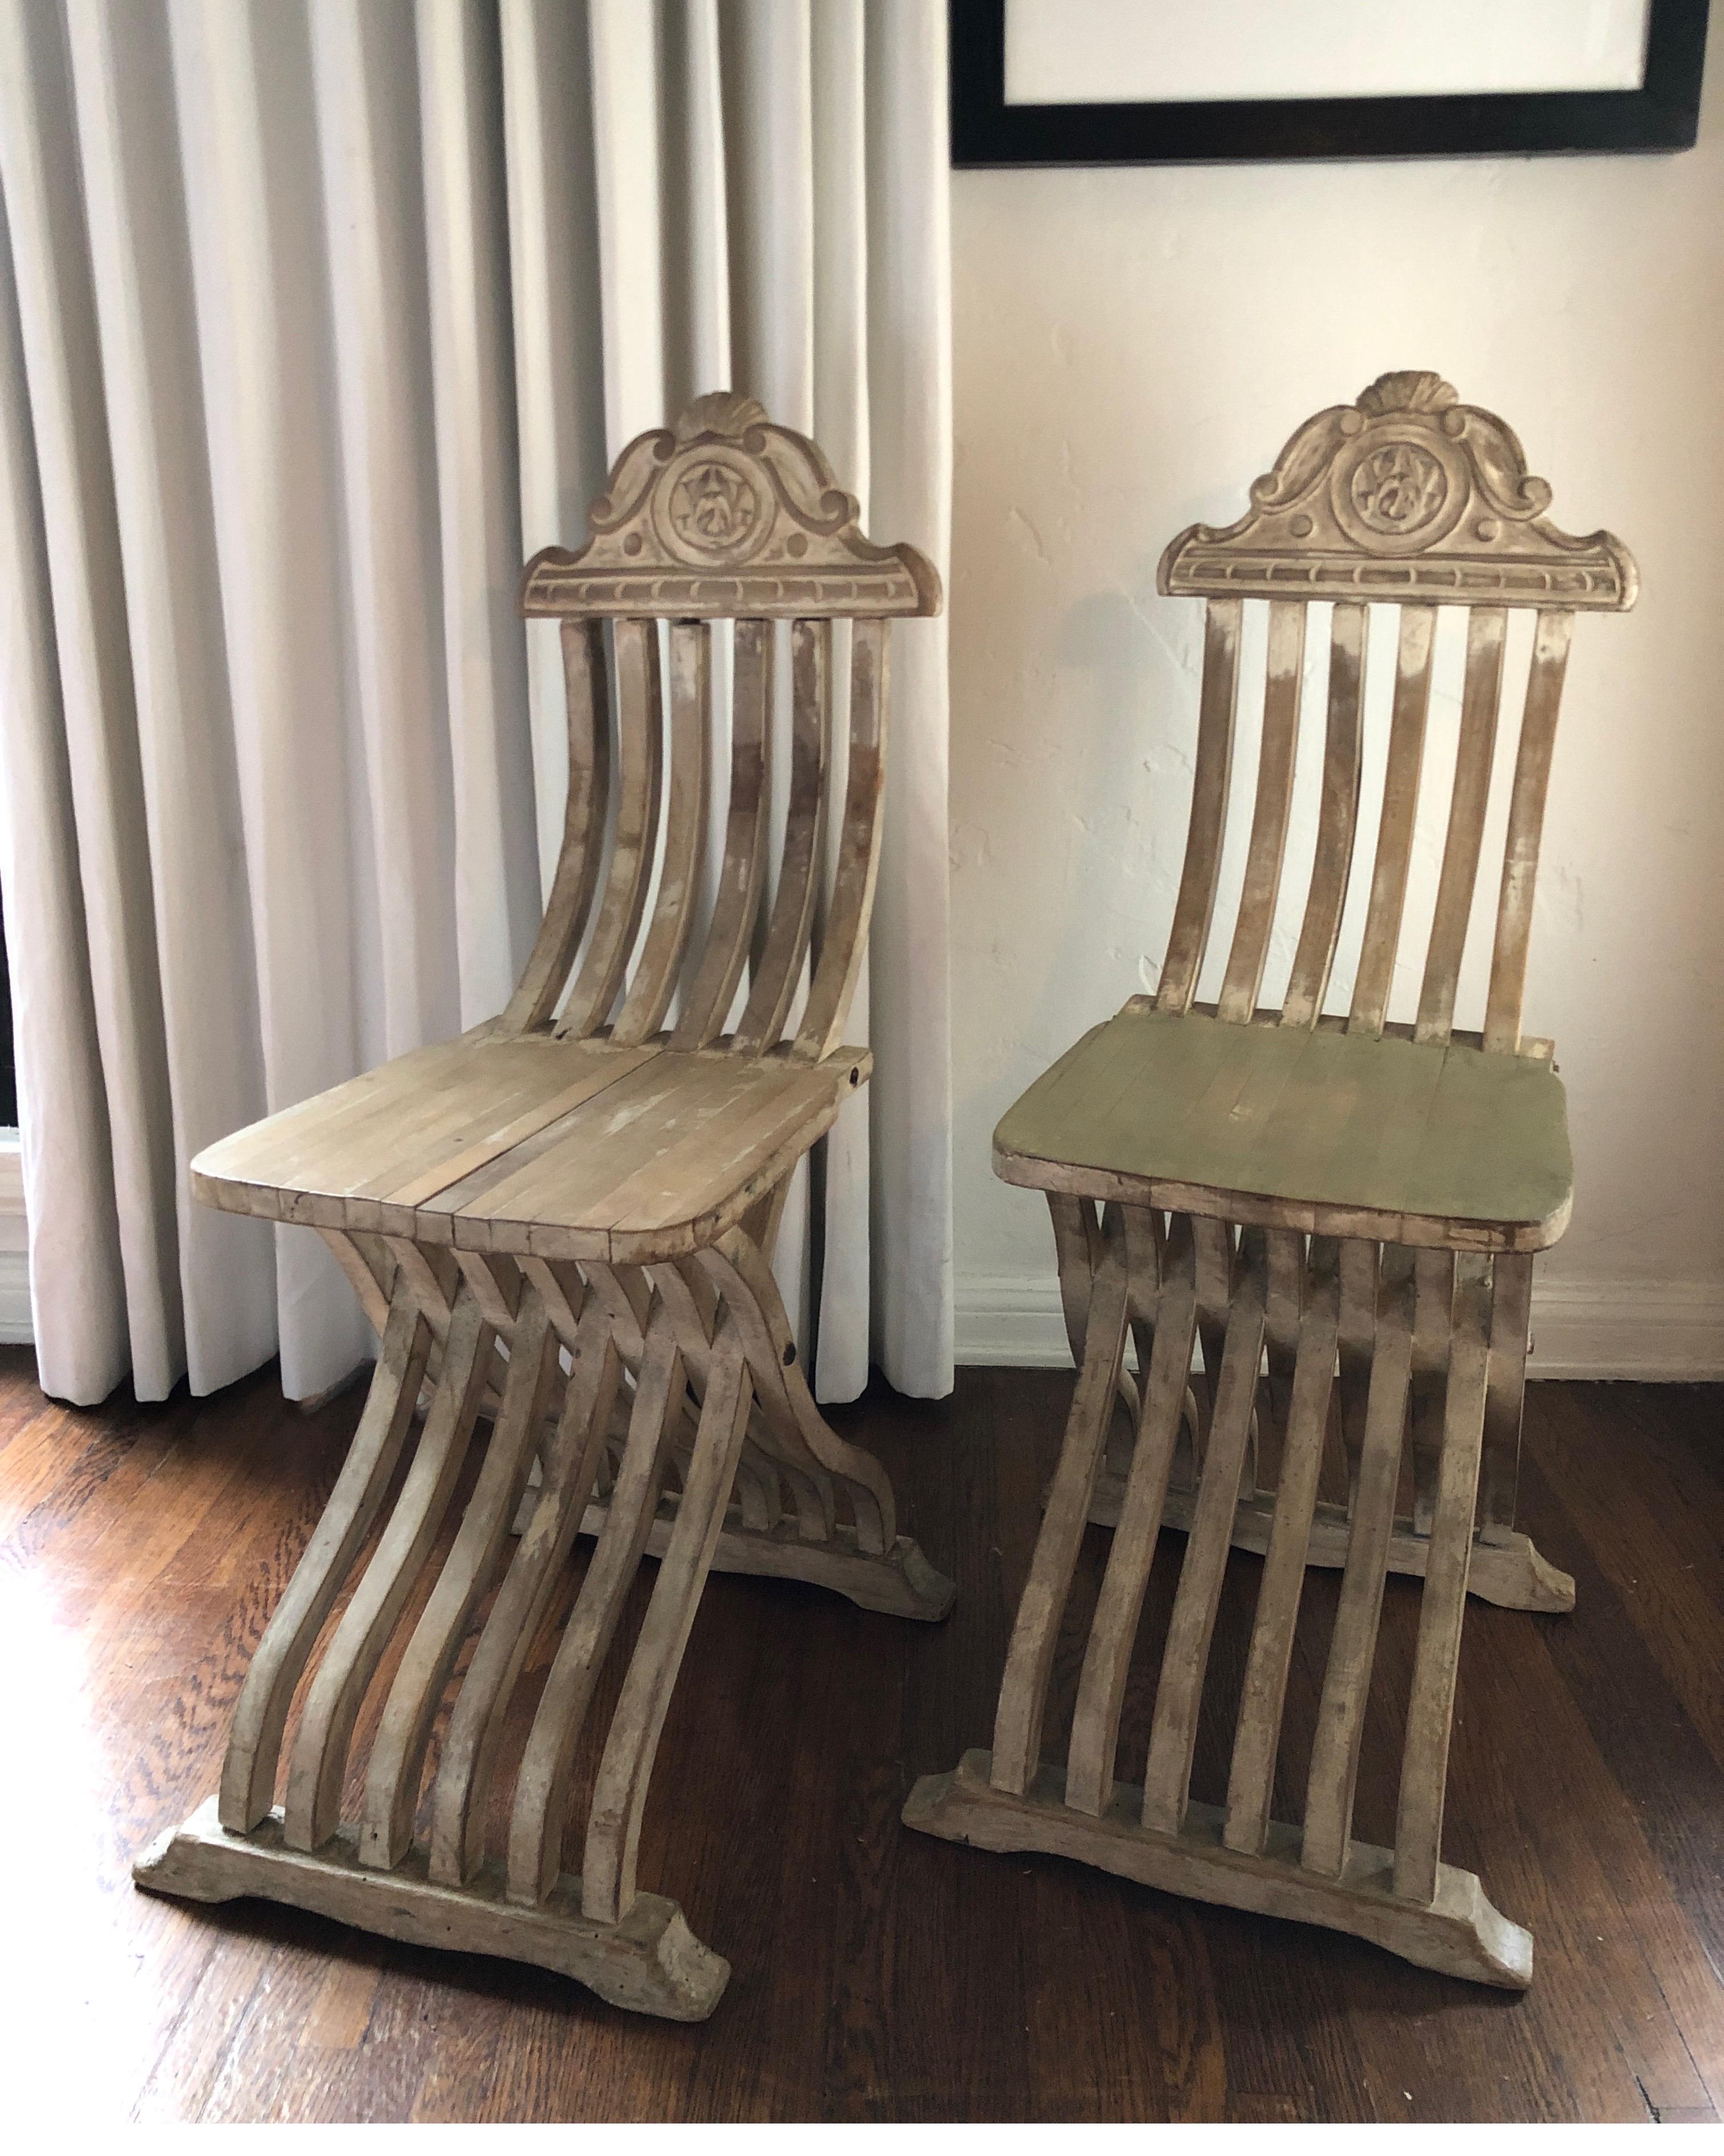 Pair of unique carved wood Savonarola side chairs for a entry way, dining table, slipper chairs.
Very sturdy. 
Ornate Italian carving at the top.